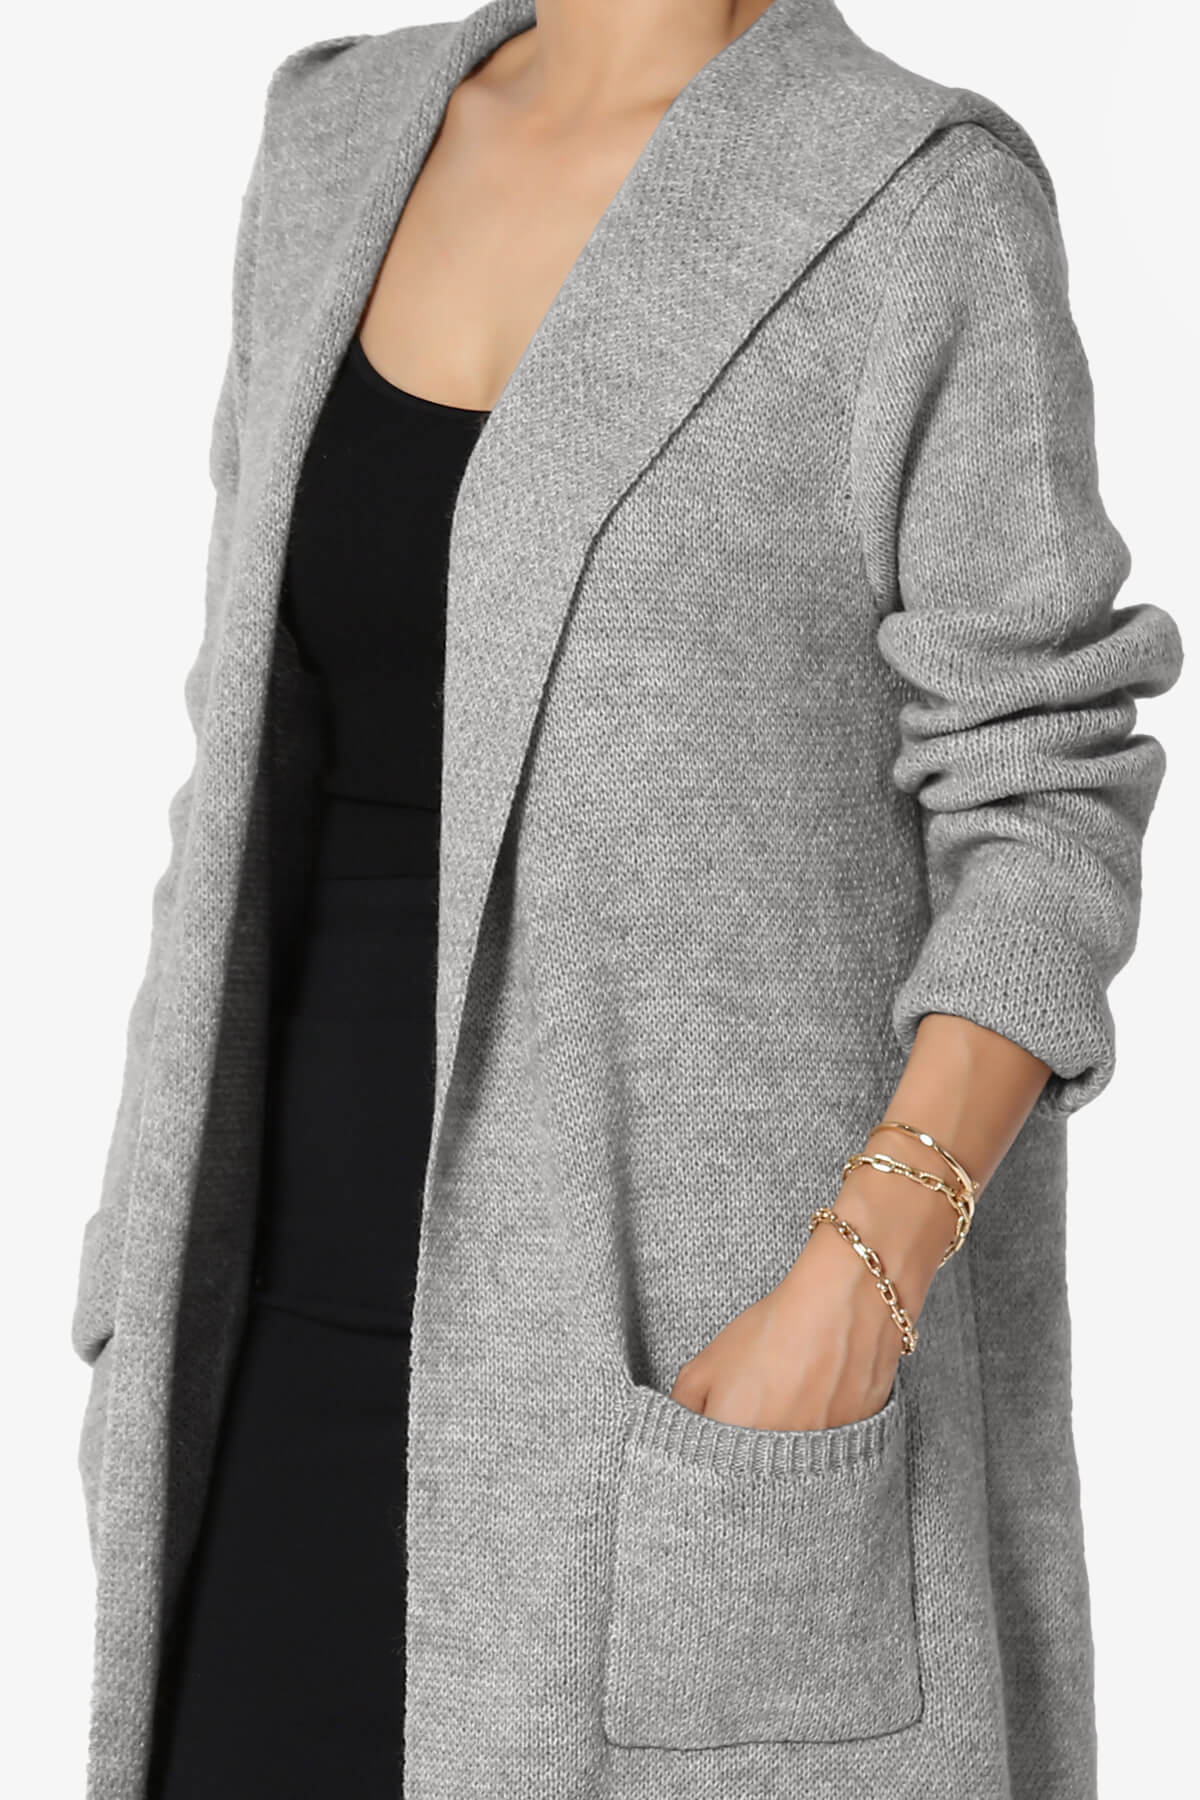 TheMogan Women's Cozy Hooded Pocket Open Front Ribbed Knit Jacket Sweater Cardigan Duster